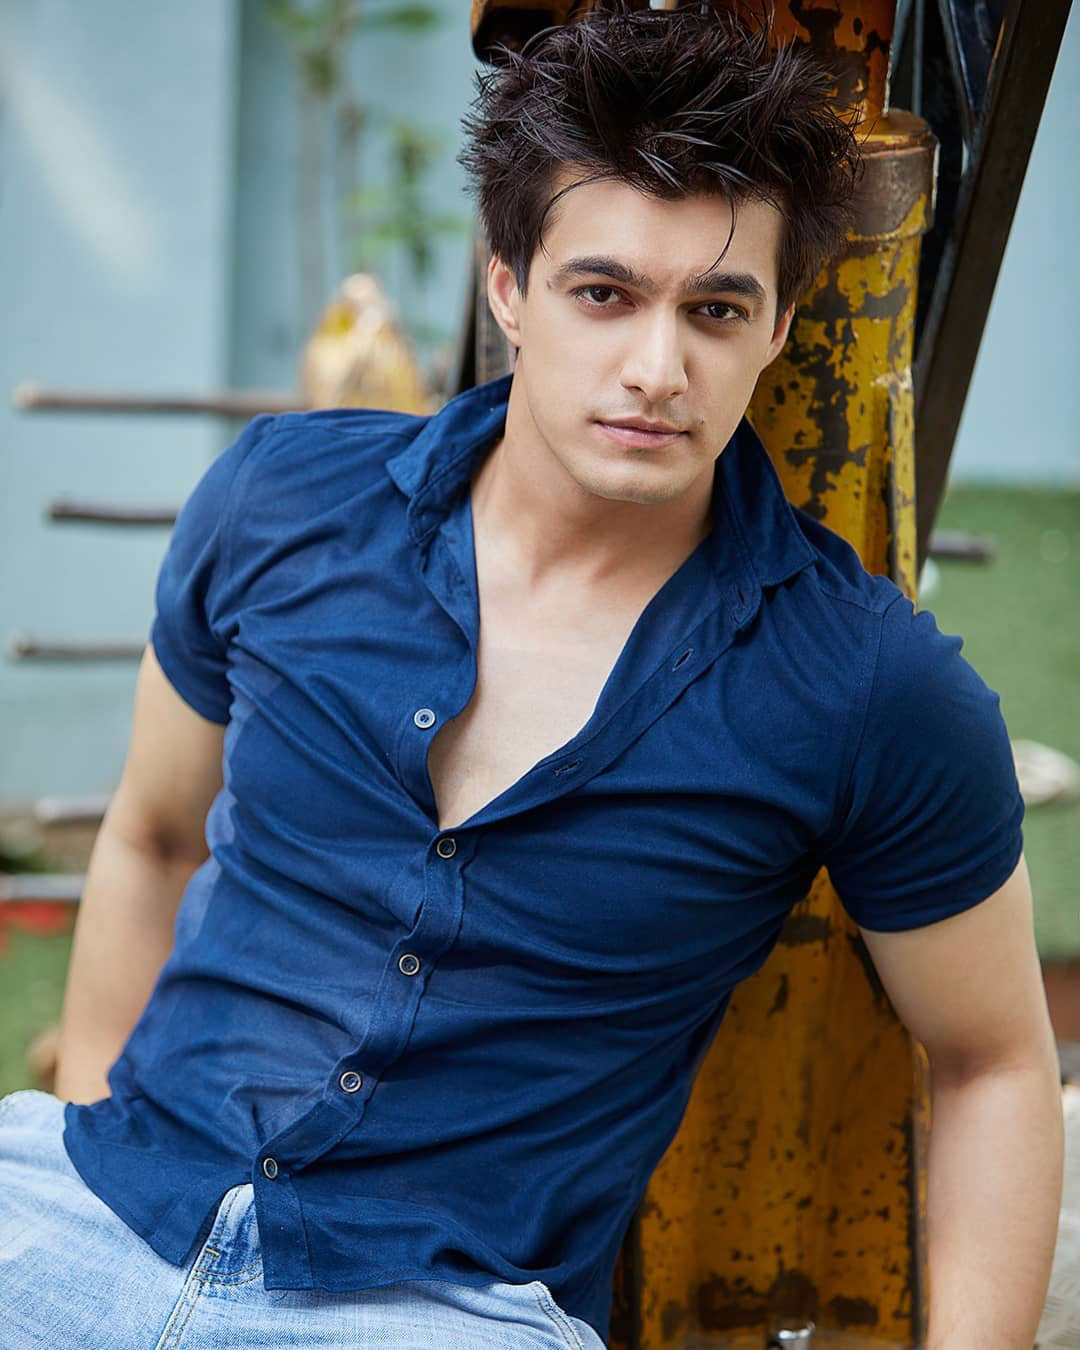 People accepted Kartik and Naira instantly: Mohsin Khan